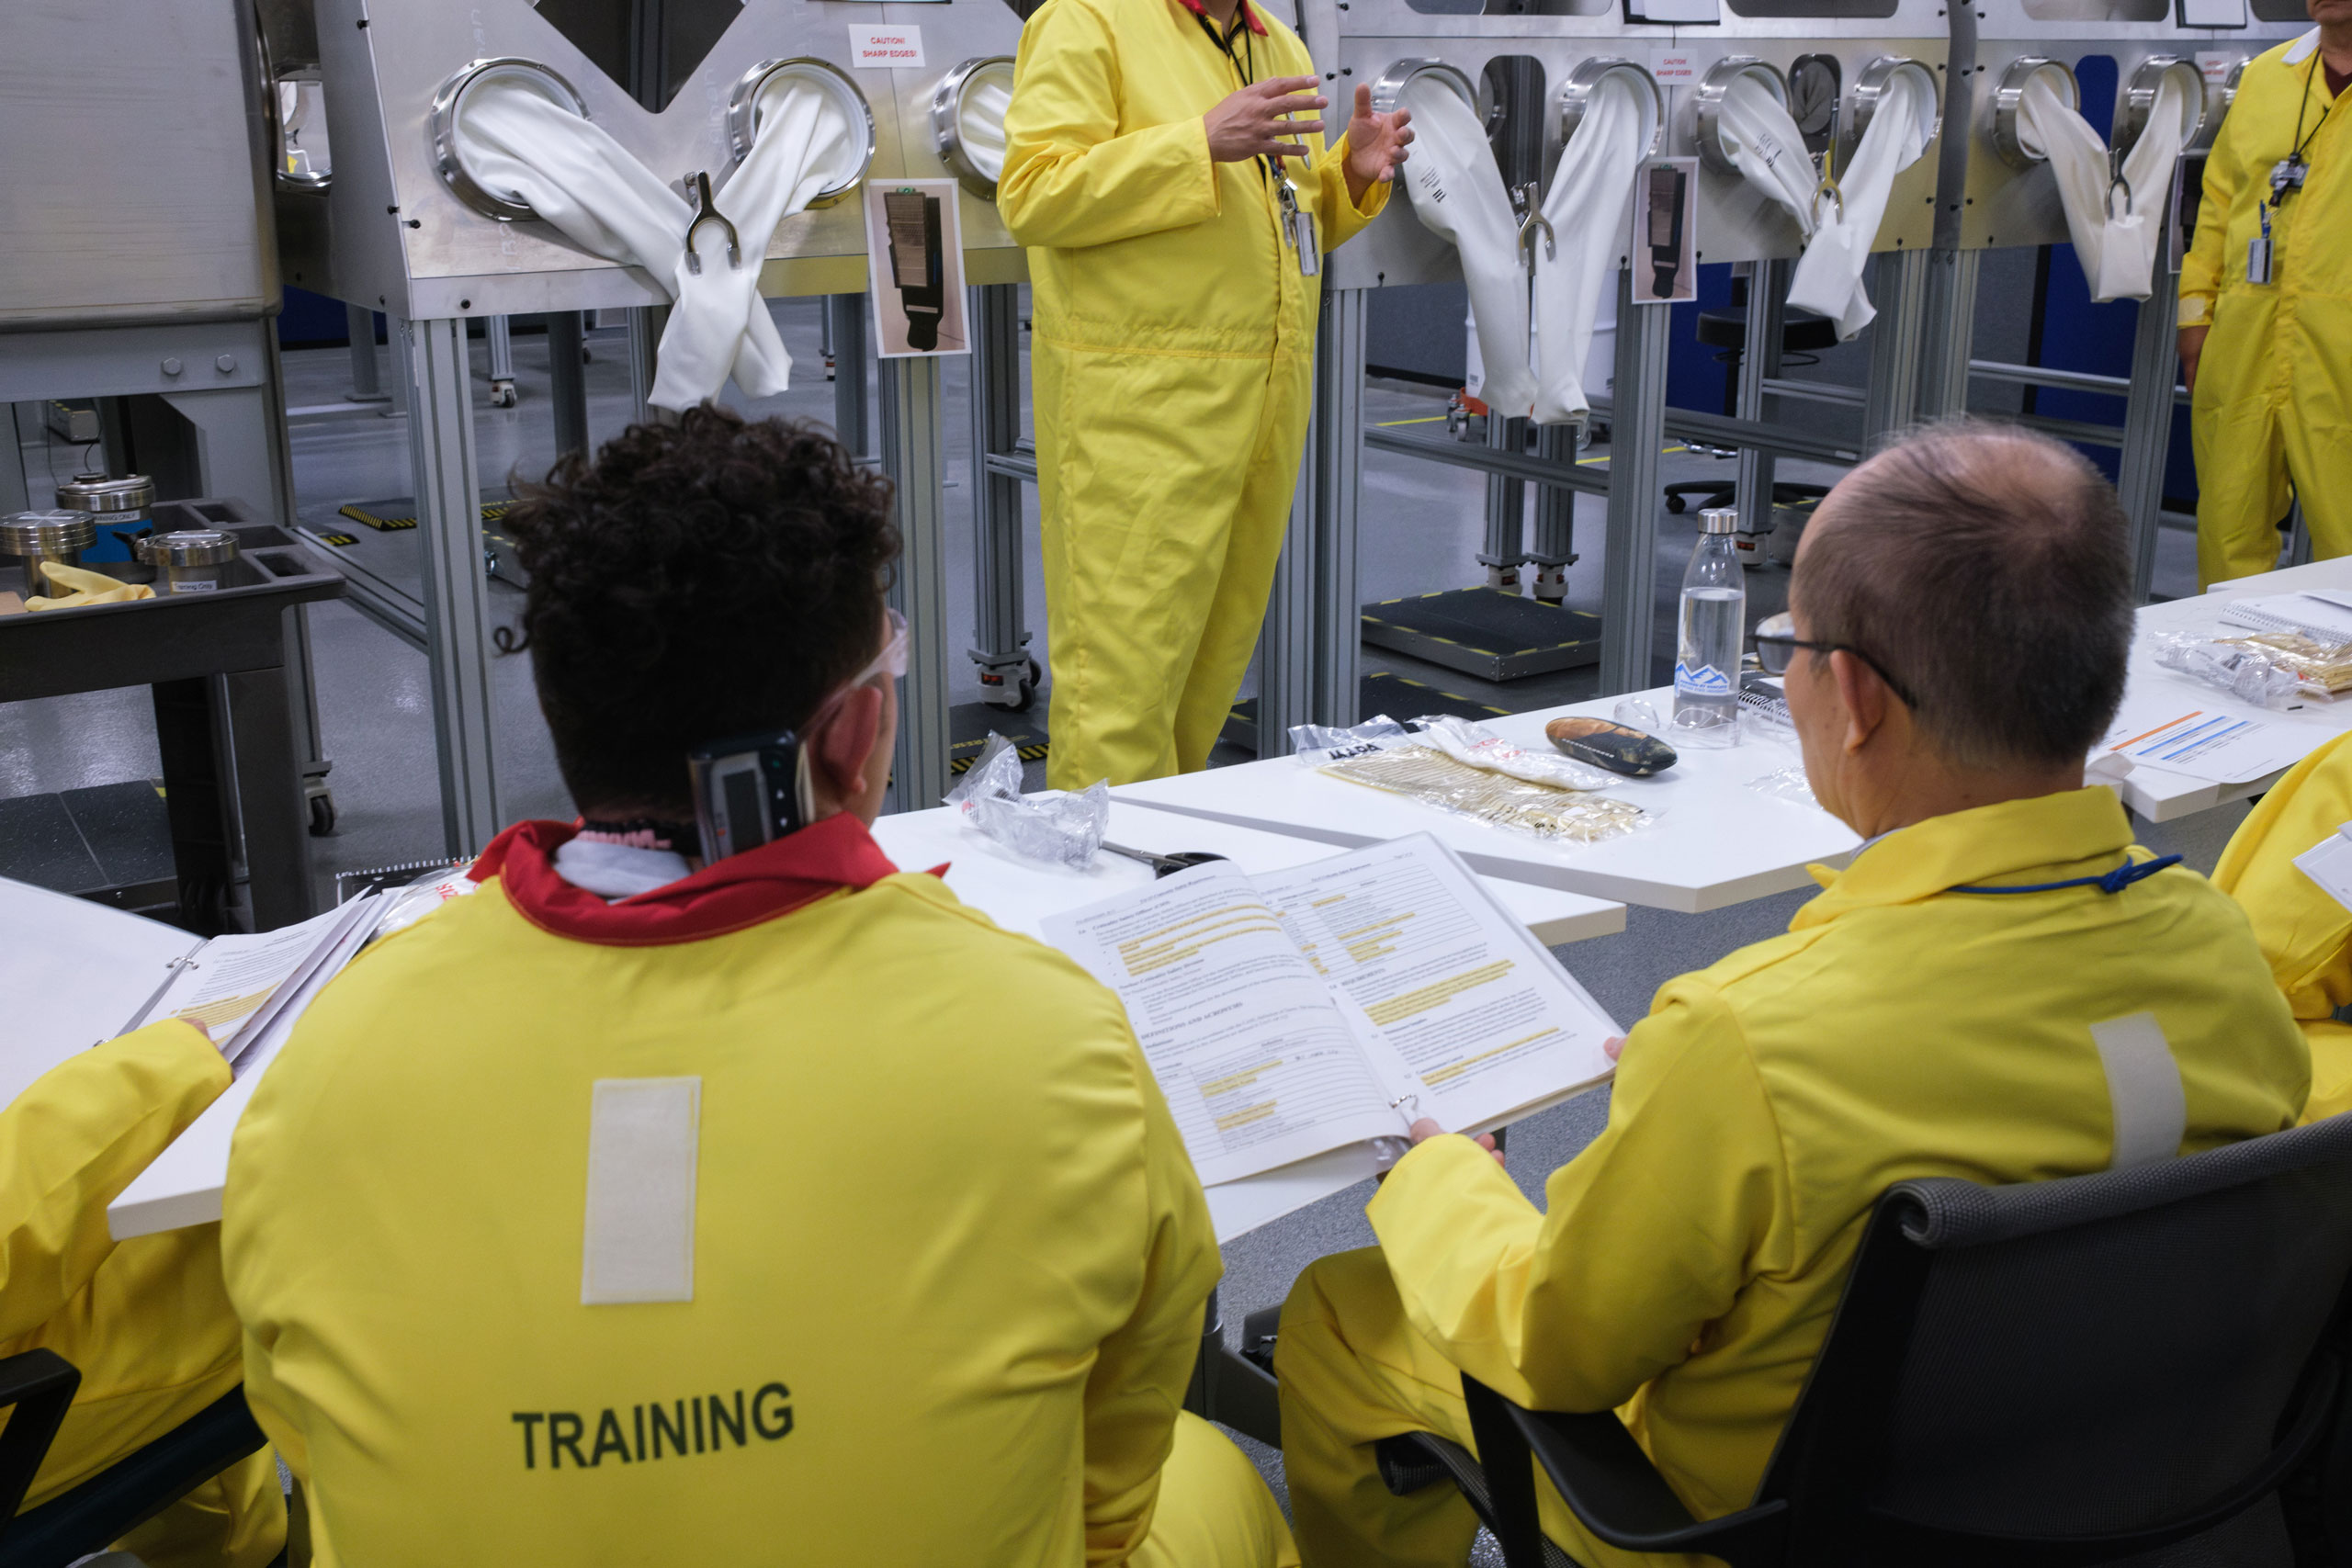 New employees prepare for the “Material Handling and Movement” training session at Los Alamos National Laboratory. (Ramsay de Give for TIME)